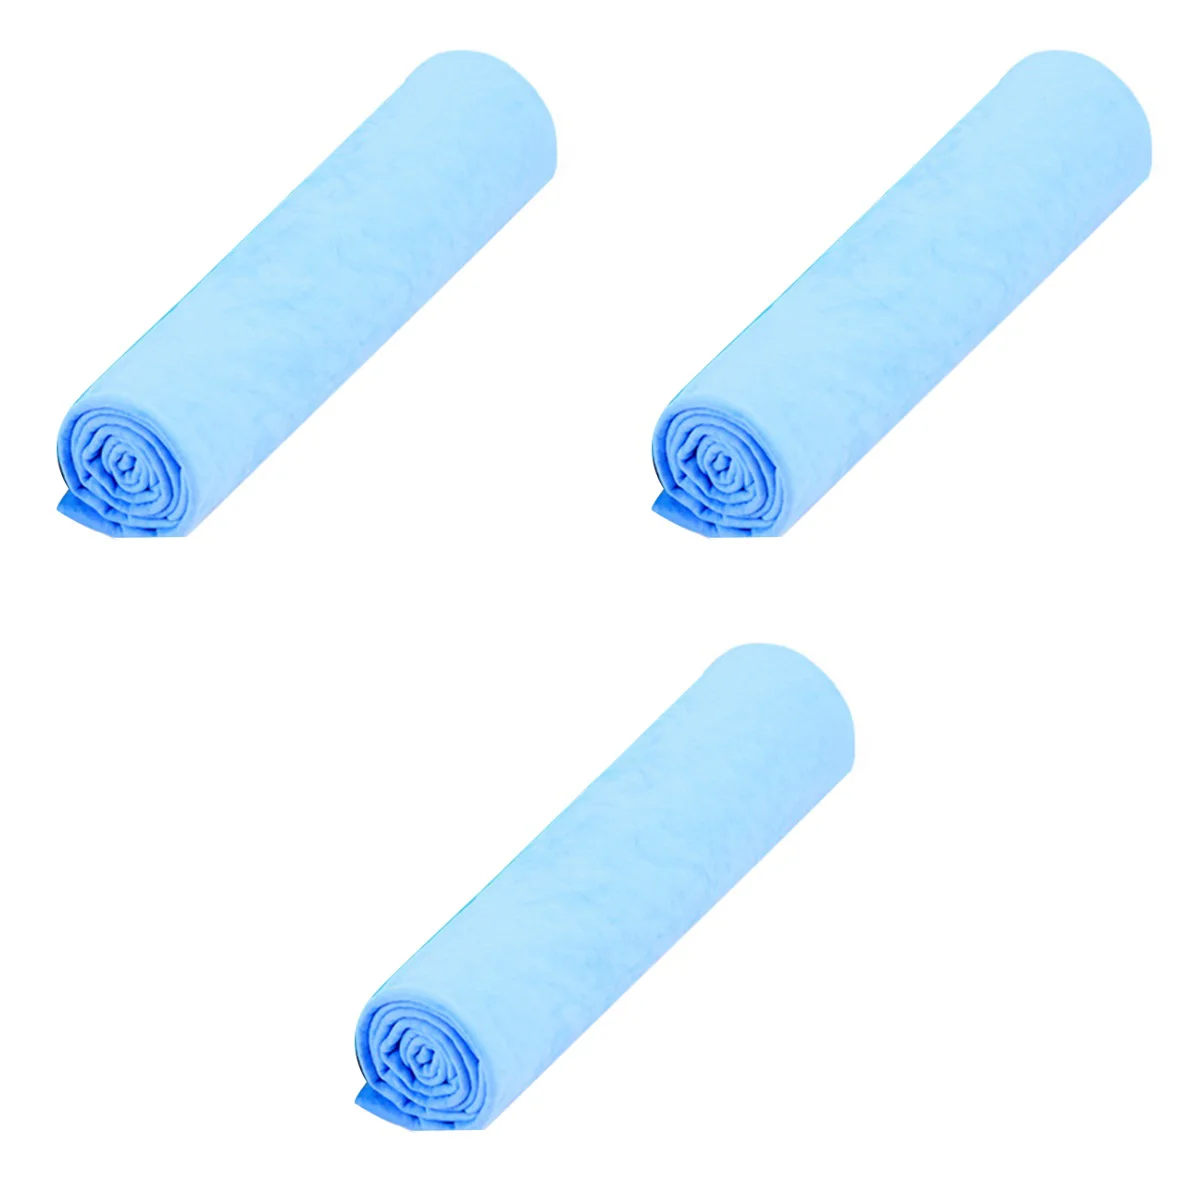 

3pcs Magical Care Synthetic PVA Deerskin Cloth Towel Car Wash Function Cleaning Absorbent Hand Machine Conjuring Cable Illusion